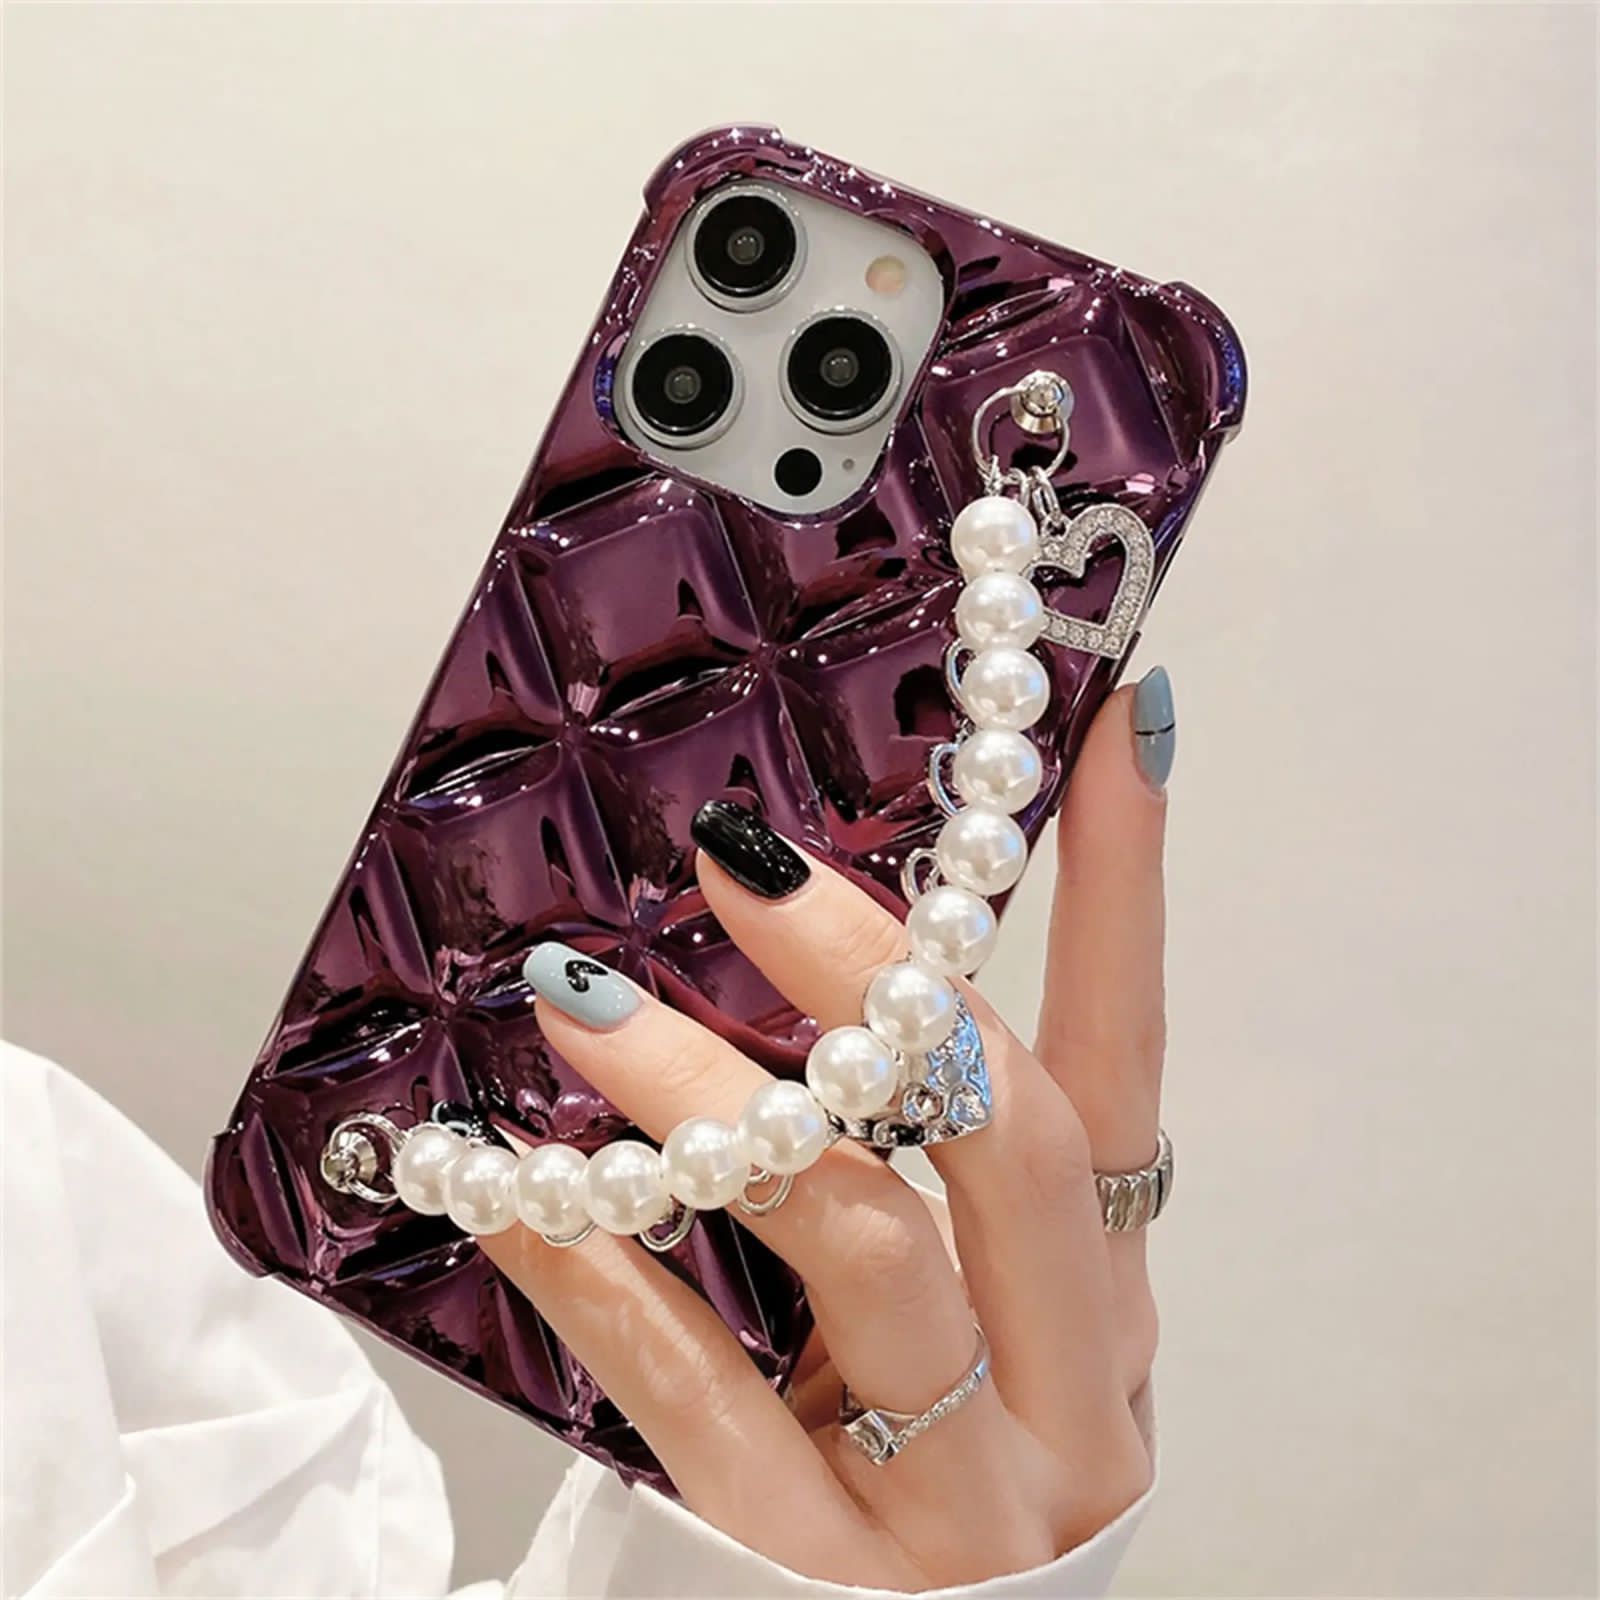 LMEIL Luxury Fashion Pearl Bracelet Chain Transparent Phone Case for iPhone  12 13 14 Pro MAX 8 7 Plus X XS XR 11 Pro Max Cover A for iPhone 13 Mini :  Amazon.in: Electronics